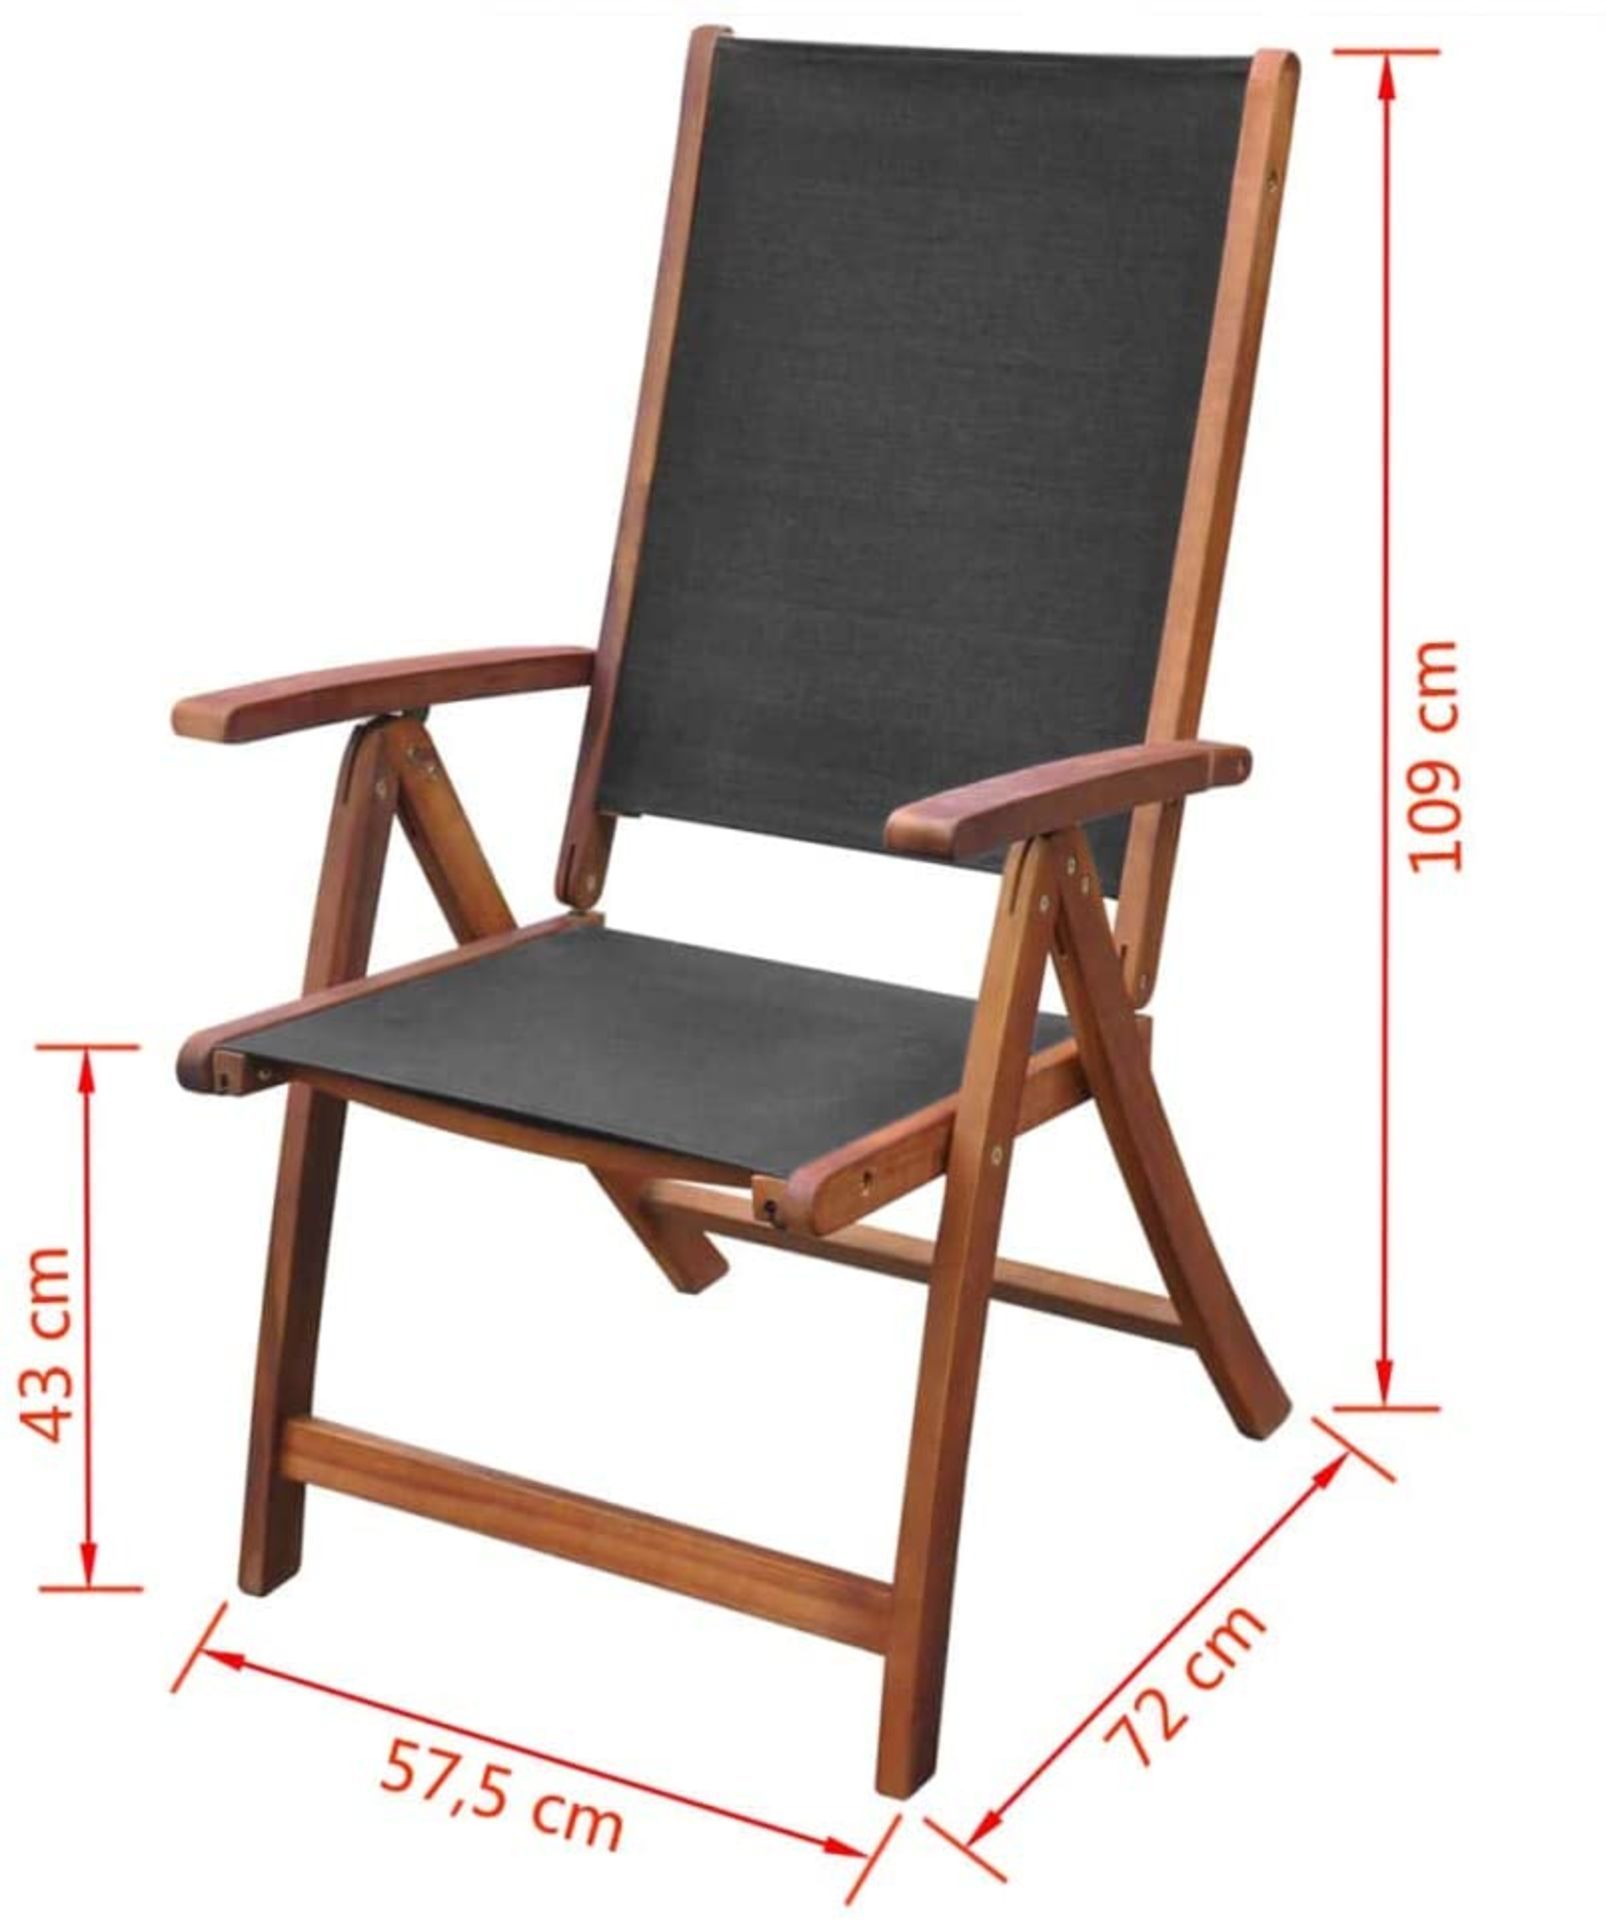 BOXED B29762:B29786 CHAIR RRP £89.00 (AS SEEN IN WAYFAIR)Condition ReportAppraisal Available on